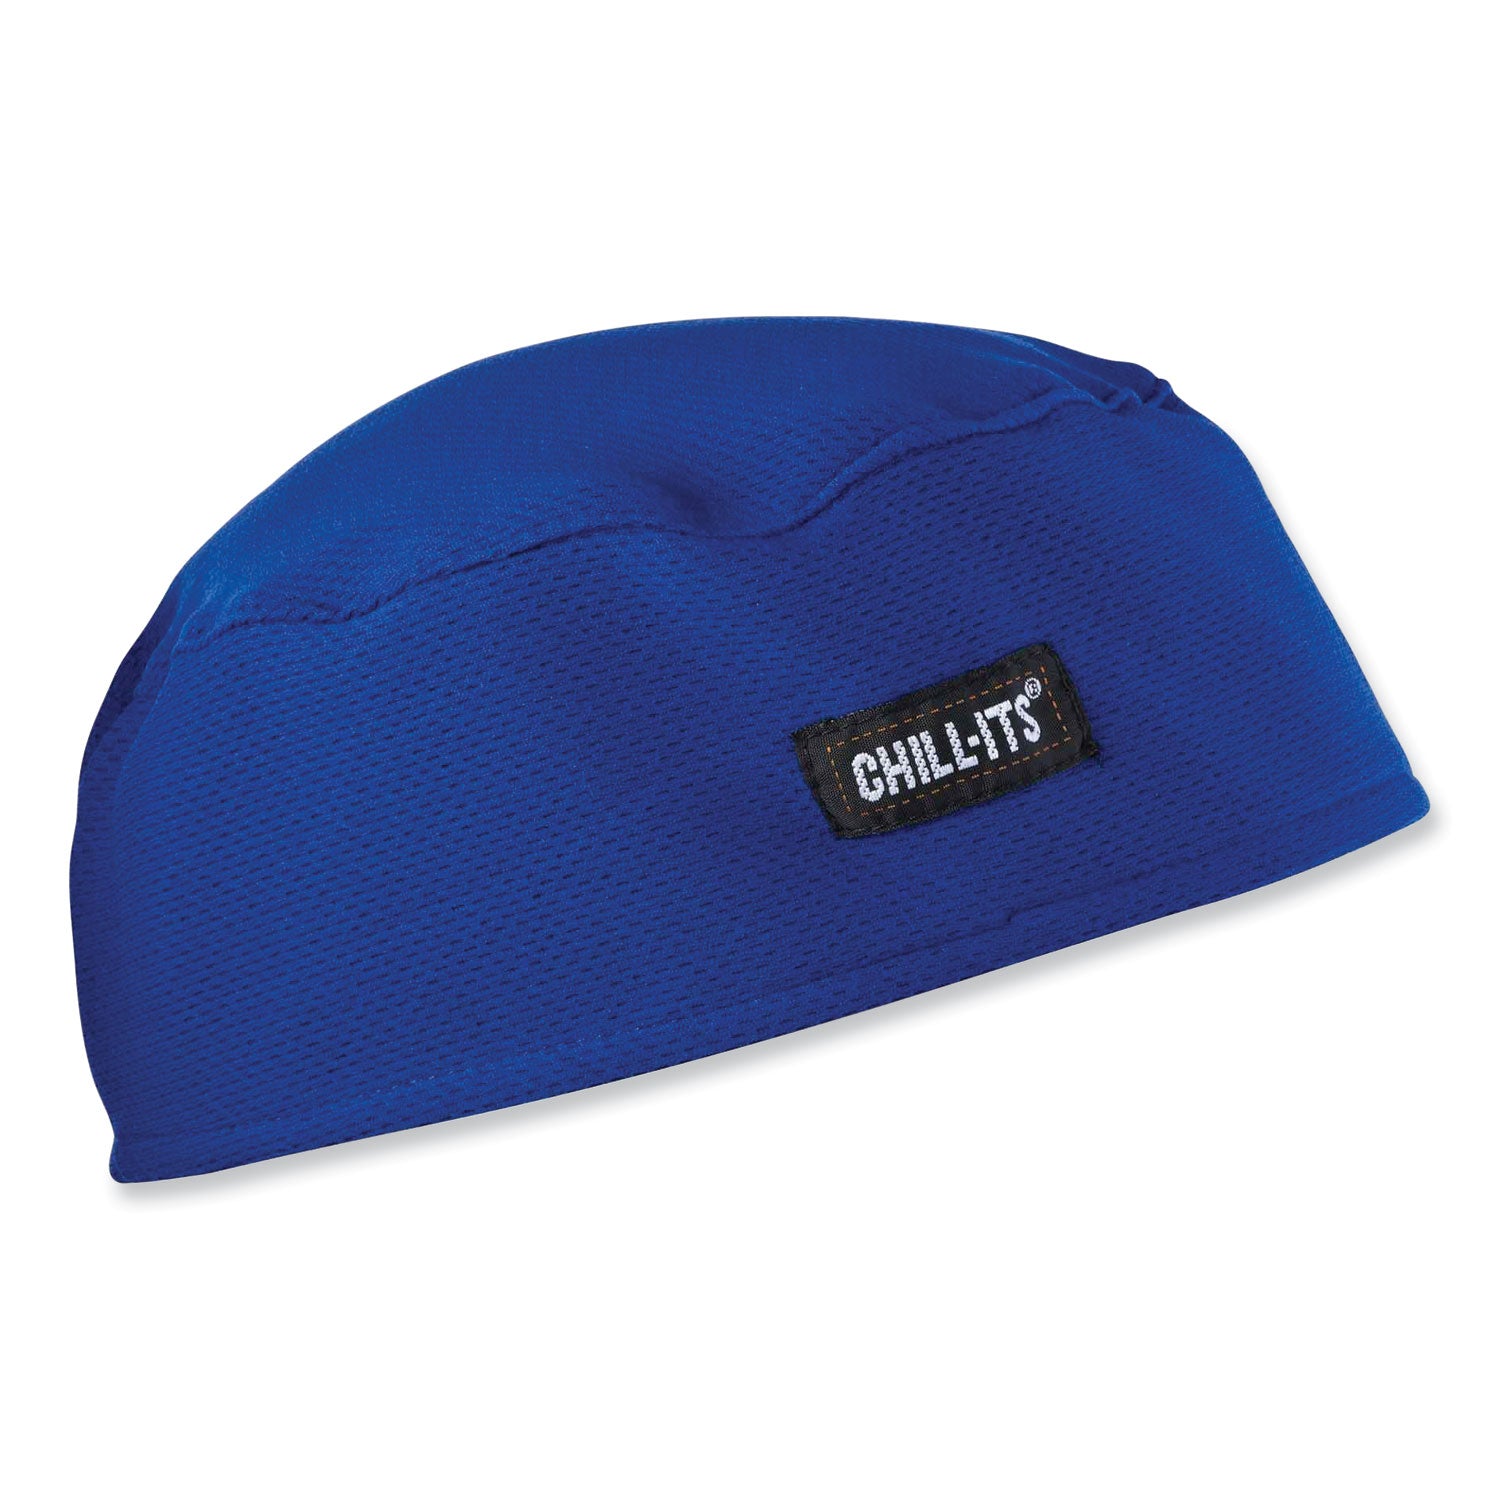 chill-its-6630-high-performance-terry-cloth-skull-cap-polyester-one-size-fits-most-blue-ships-in-1-3-business-days_ego12510 - 1